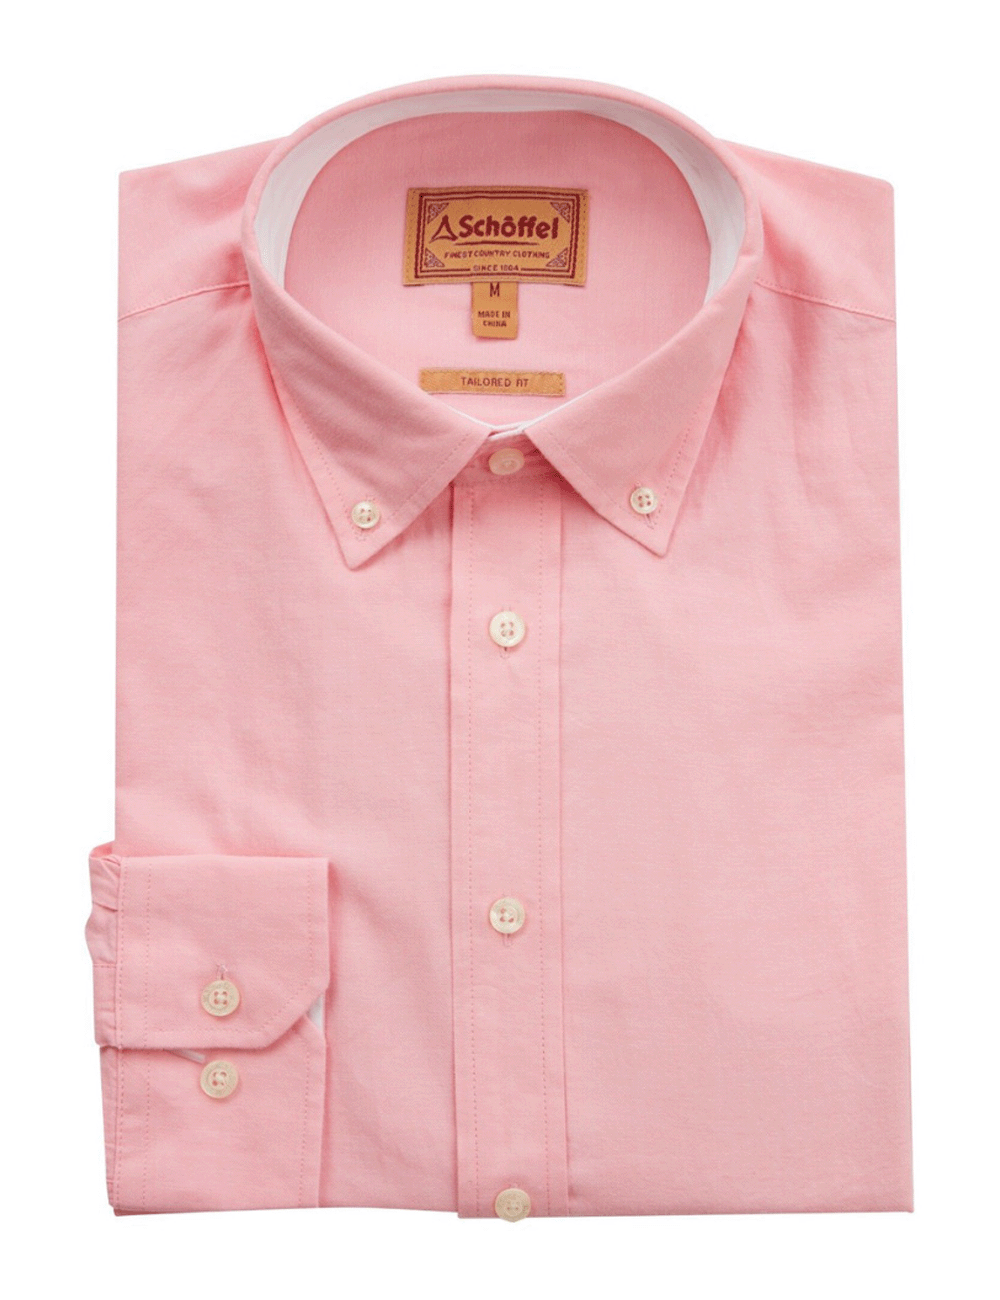 Schoffel's Titchwell Shirt in Flamingo folded on a white background